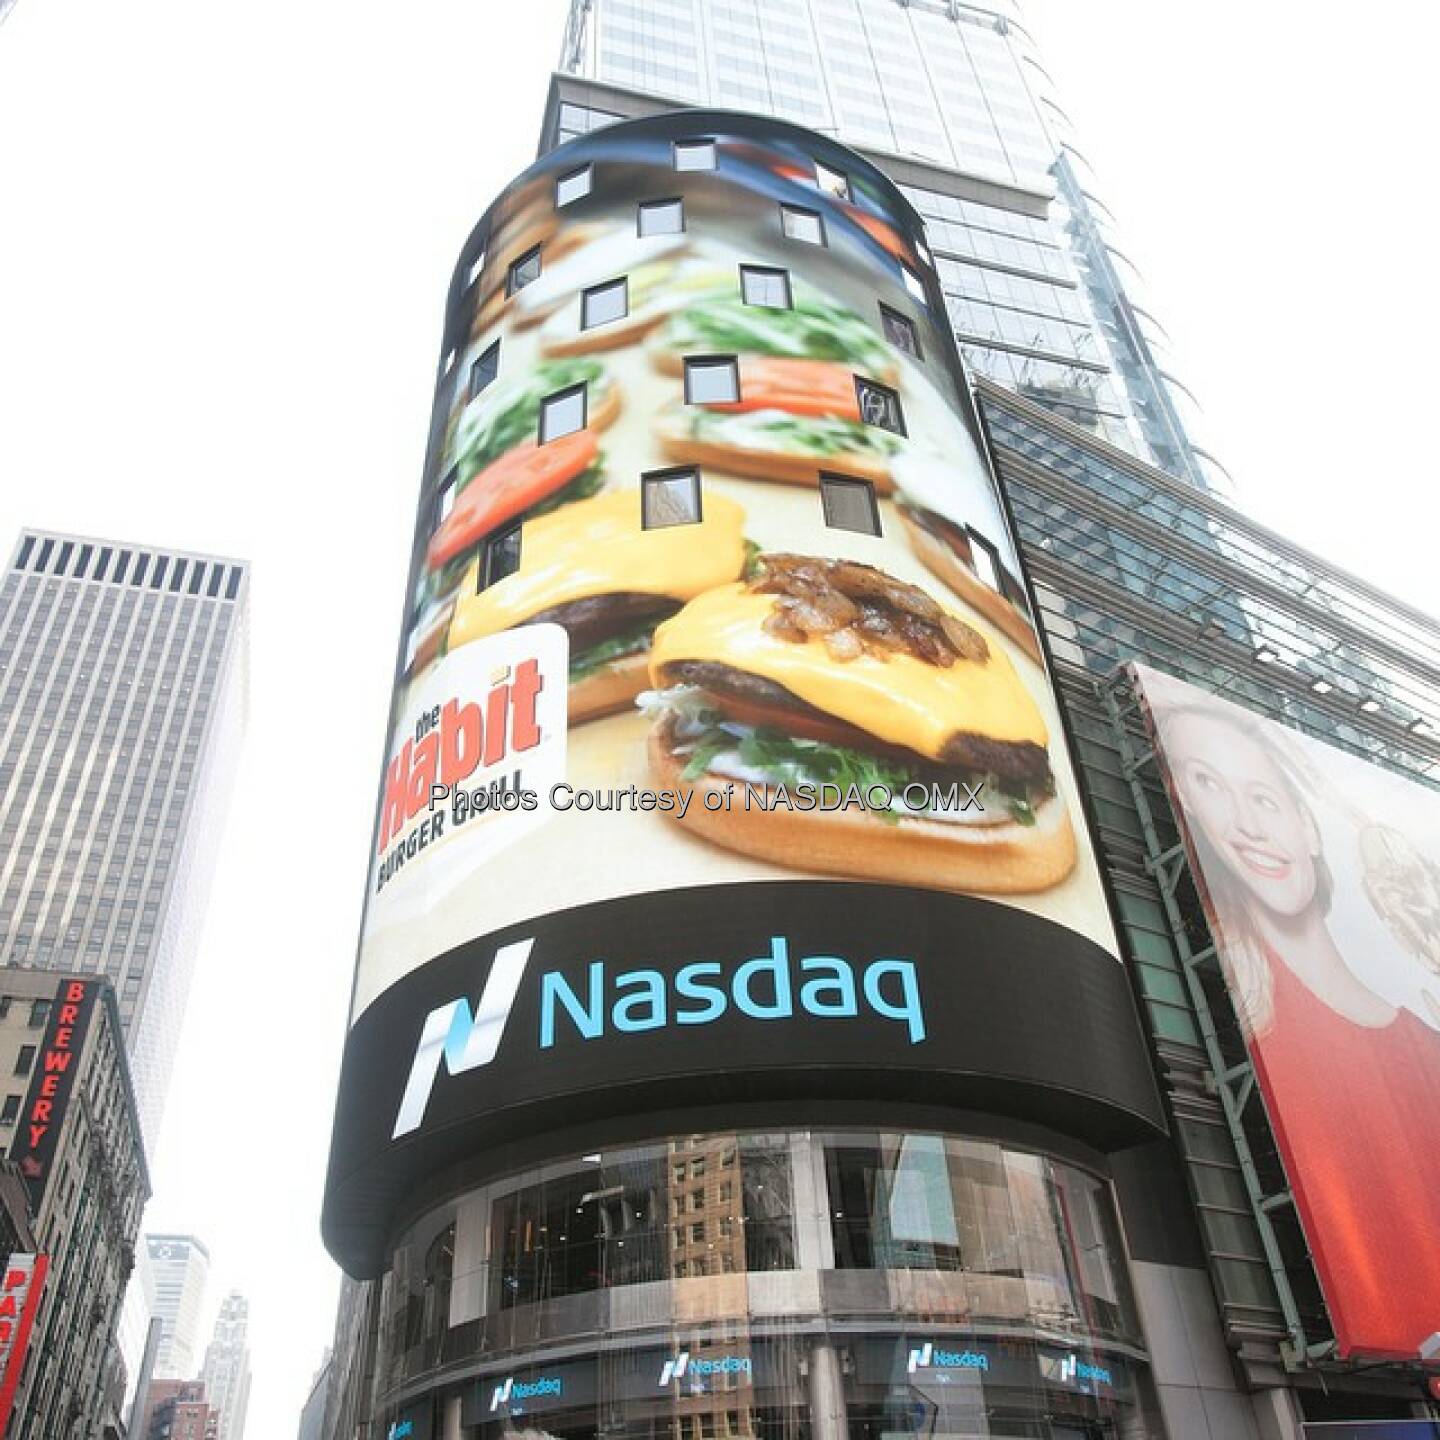 Great day for a great company! @habitburgergrill is #NasdaqListed today! Welcome to the #Nasdaq family $HABT #NewHabitinTown #IPO  Source: http://facebook.com/NASDAQ